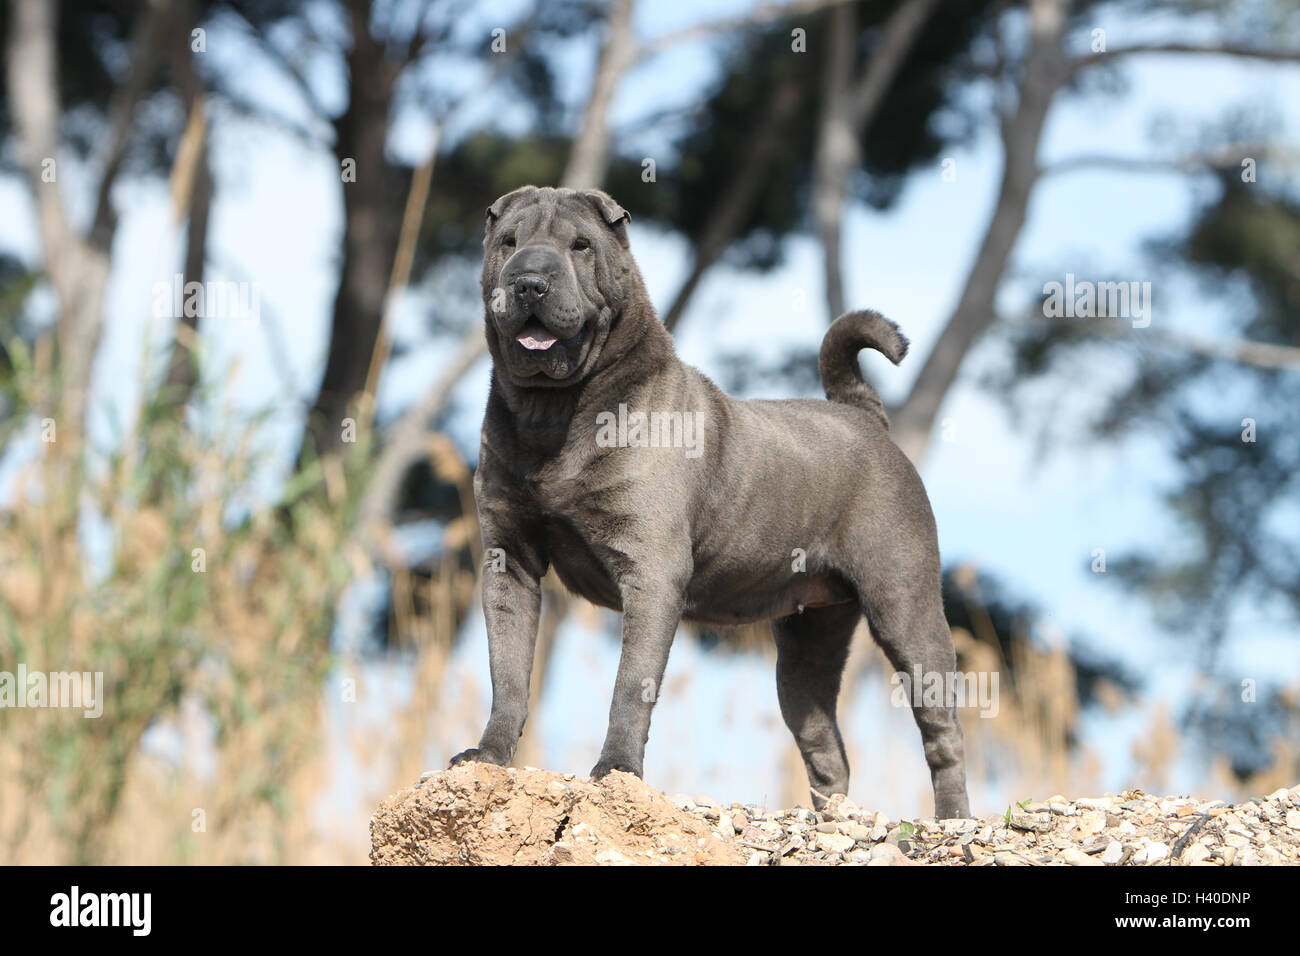 Dog Shar pei adult blue standing on rock forest Stock Photo